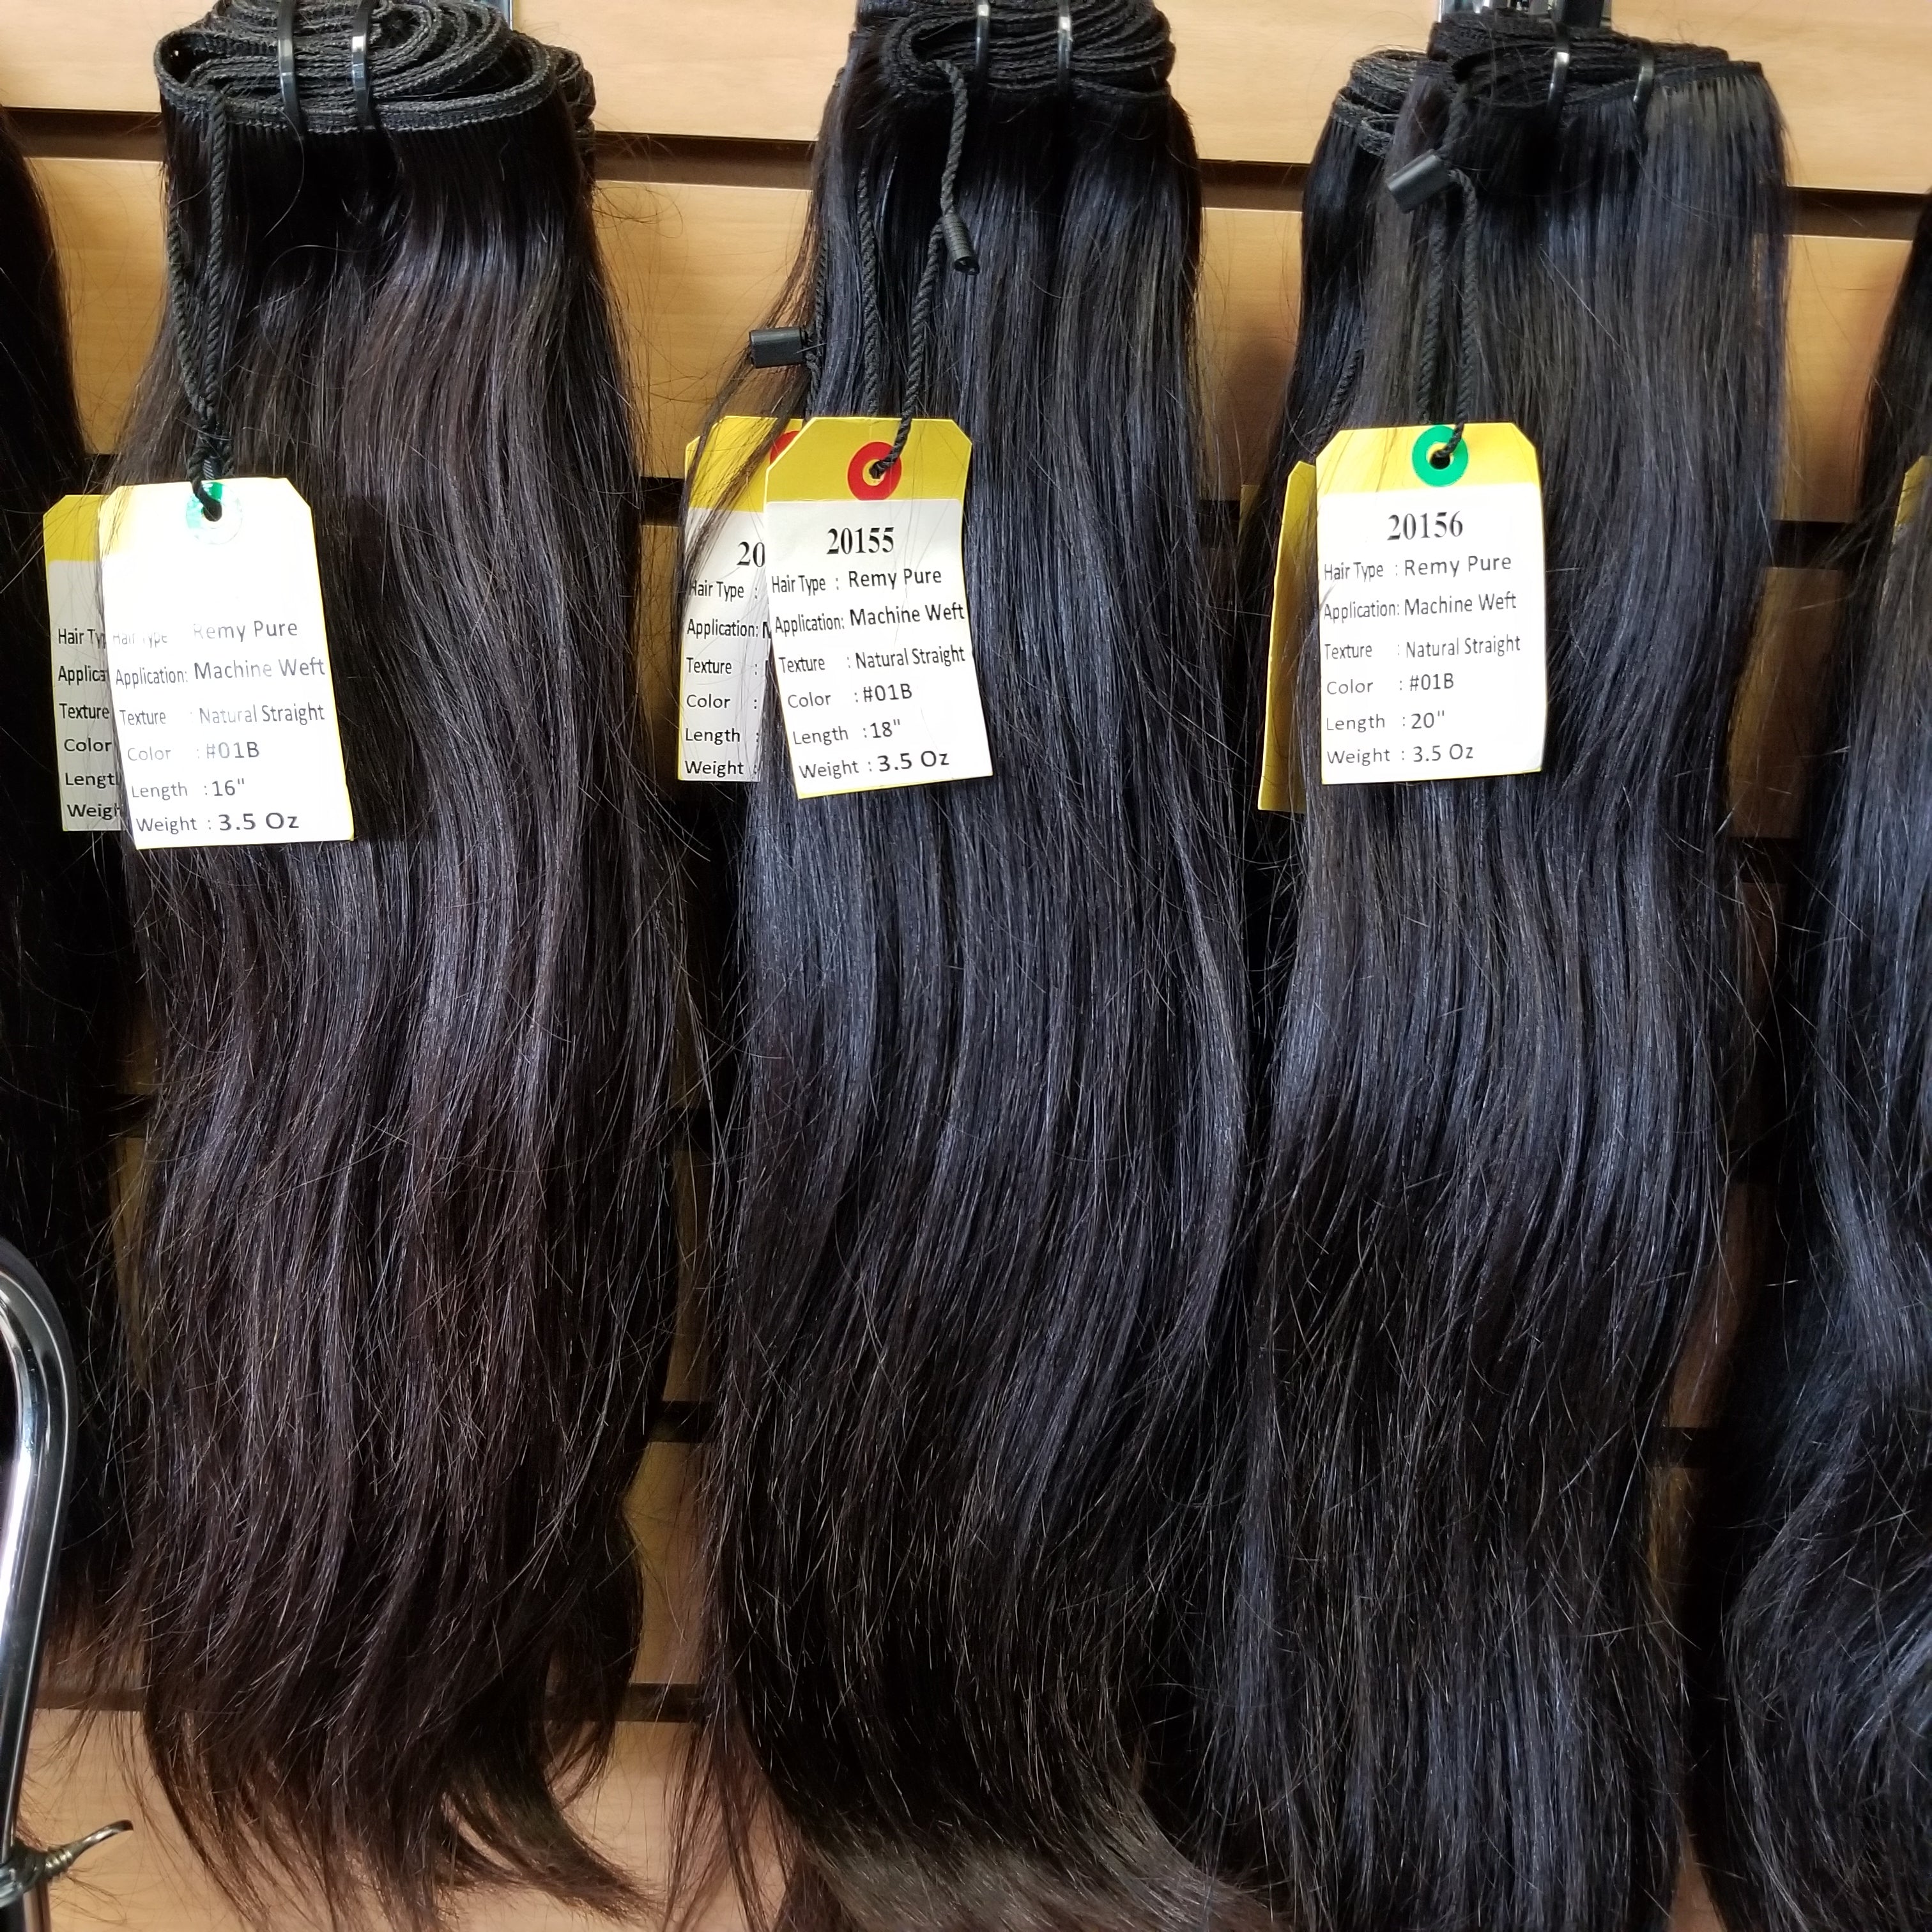 Sunny Clip in Hair Extensions 16 inch Balayage Off Black to Medium Brown  Mix Caramel Blonde Straight Hair 7pcs 120g - Walmart.com